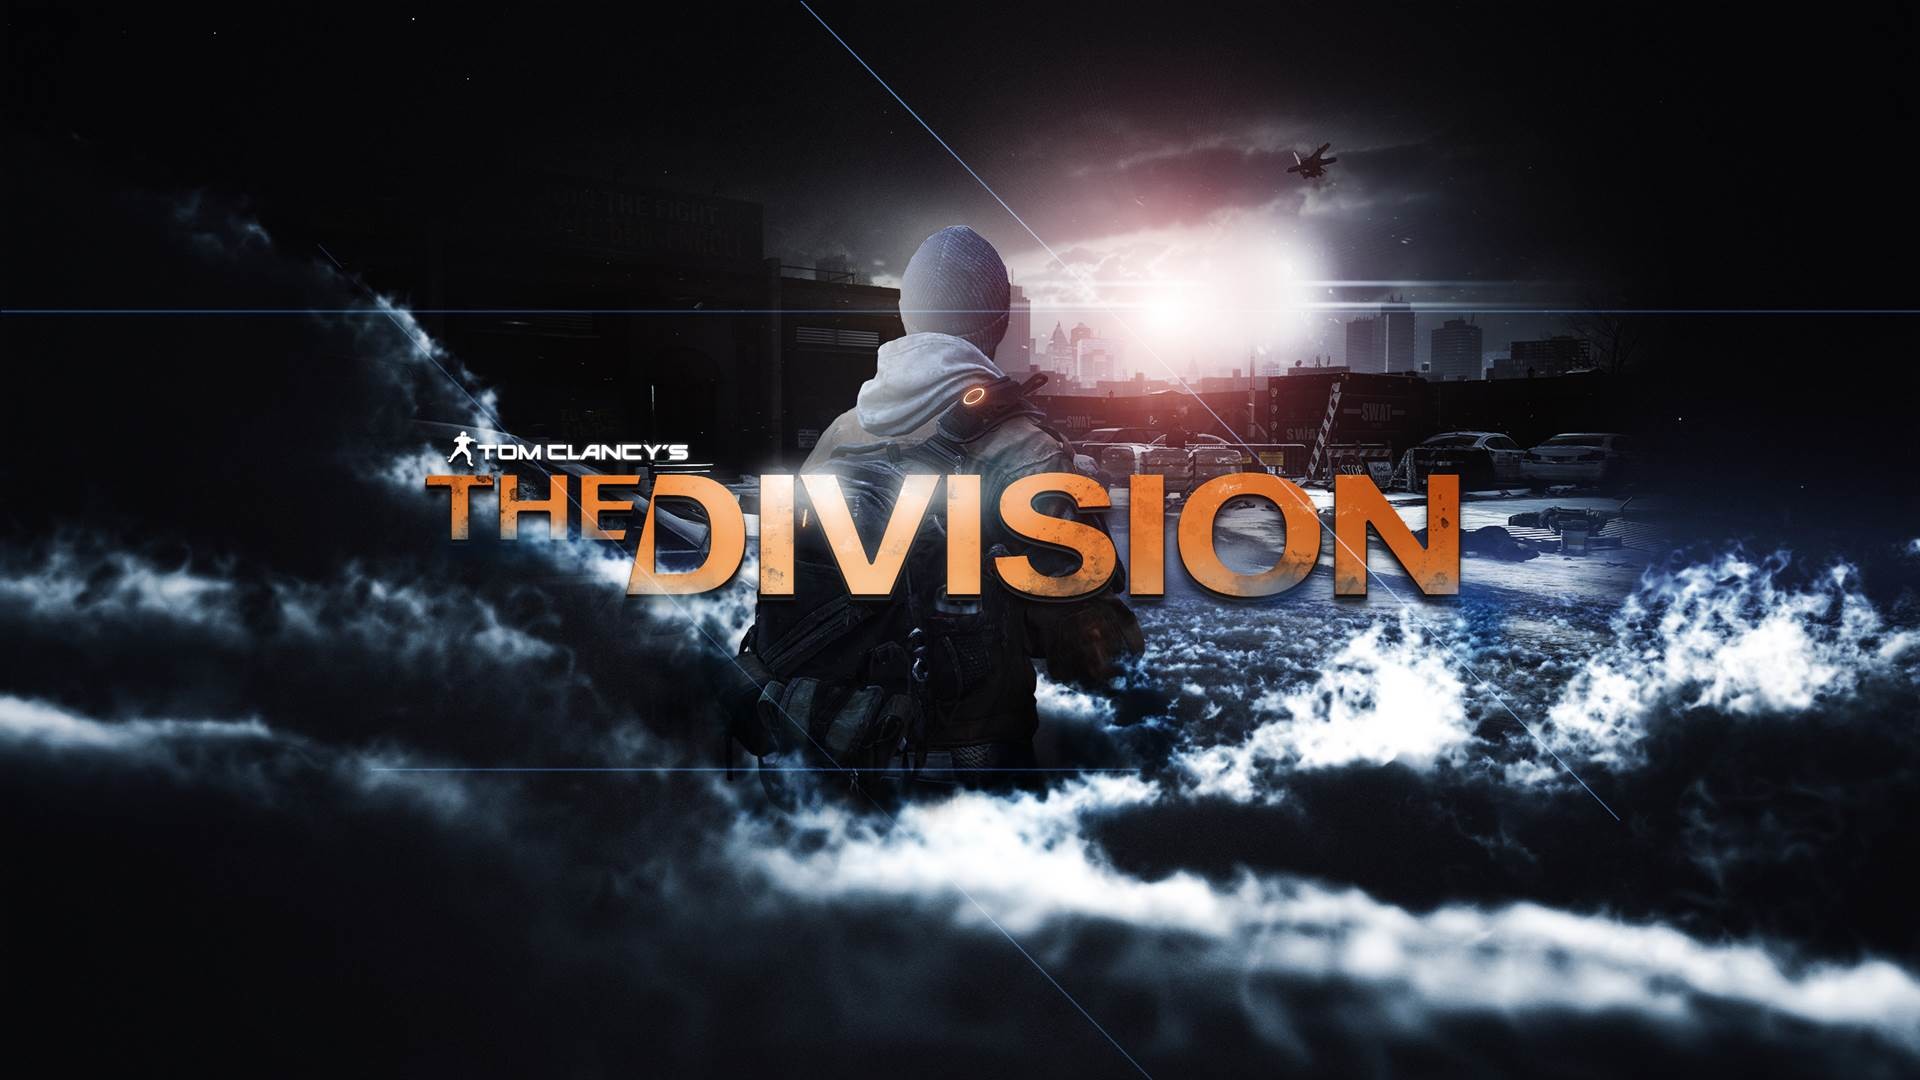 1920x1080 Tom Clancy's The Division Wallpapers in 1080P HD Â« GamingBolt.com .